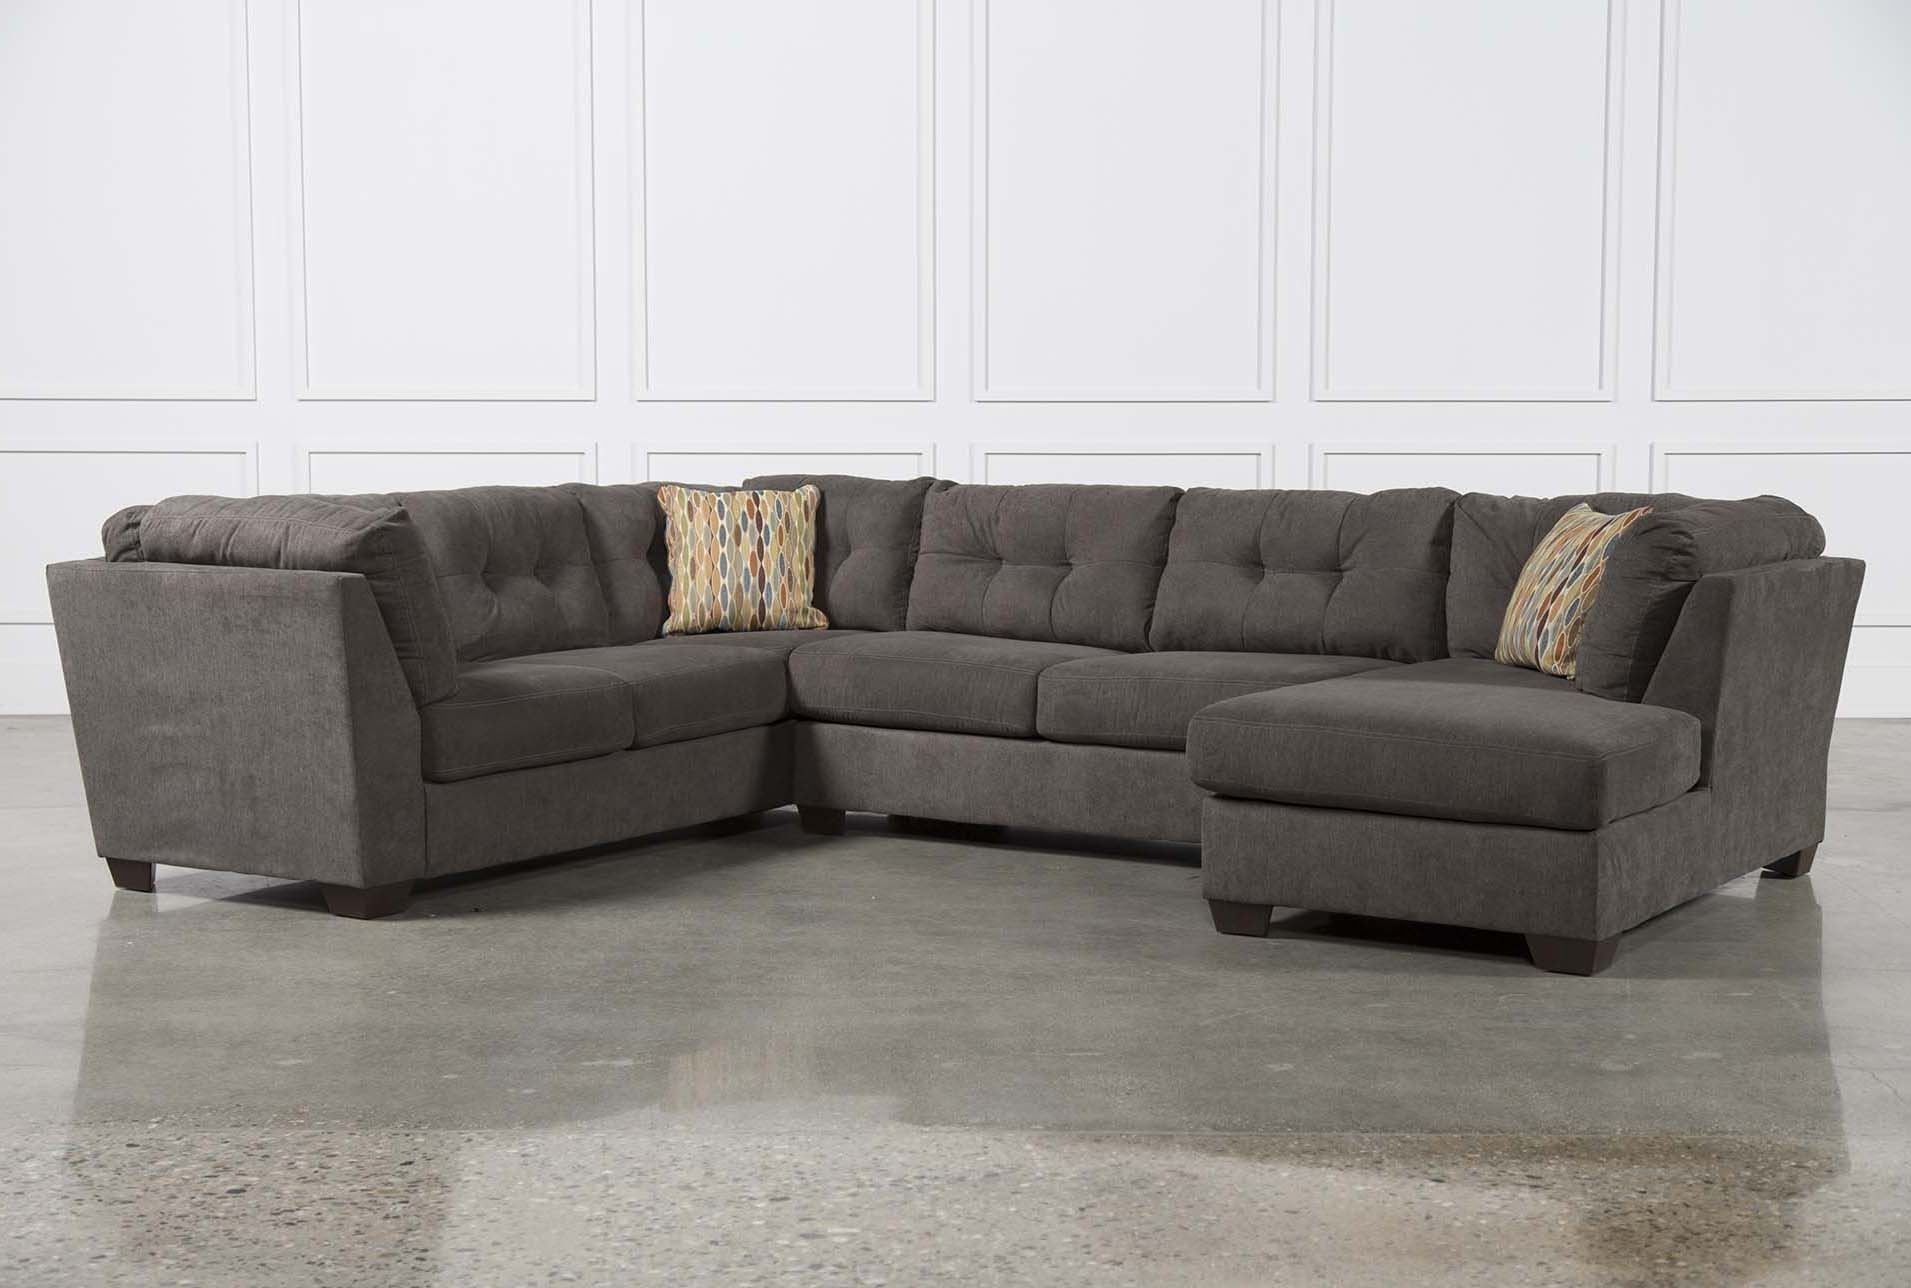 Delta City Steel 3 Piece Sectional W/sleeper & Right Facing Chaise Throughout 3 Piece Sectional Sleeper Sofas (View 1 of 10)